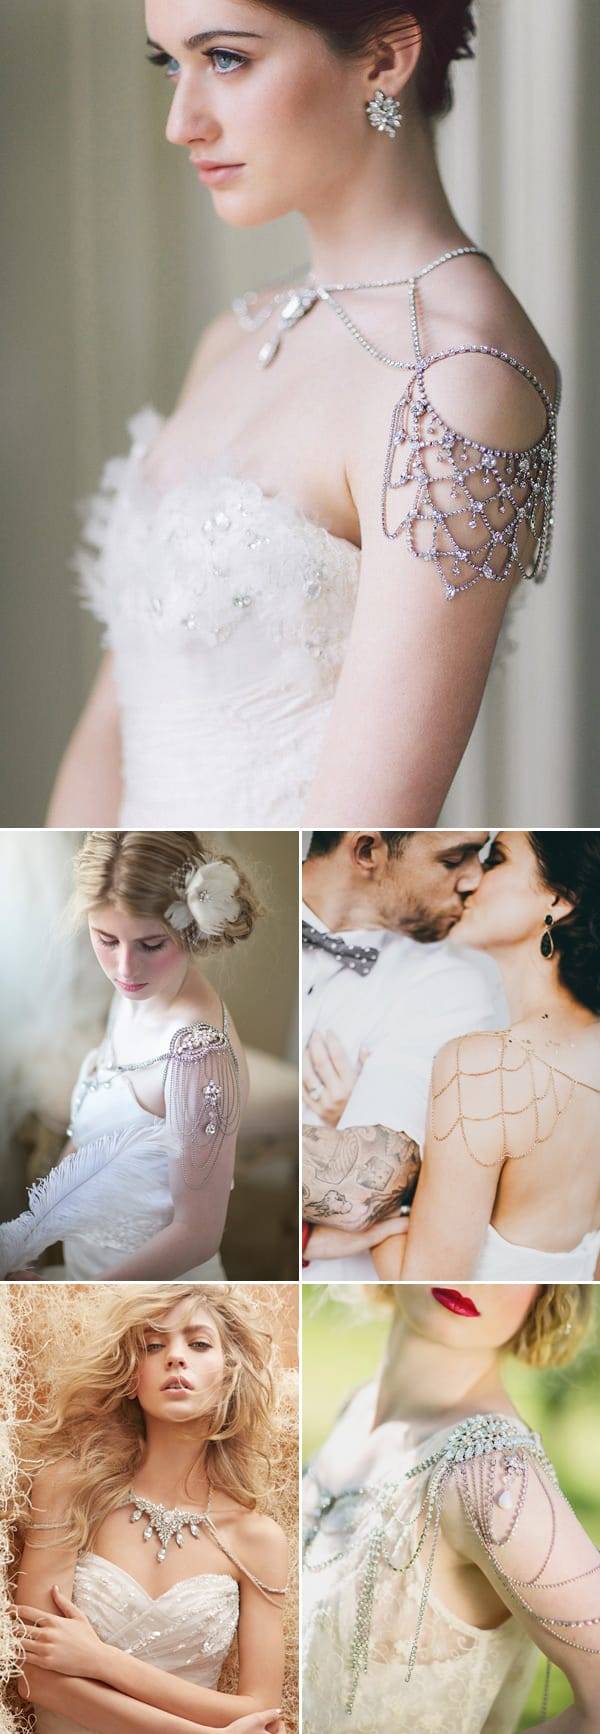 7 Elegant Wedding Jewelry Accessories for a Modern Young Bride 25